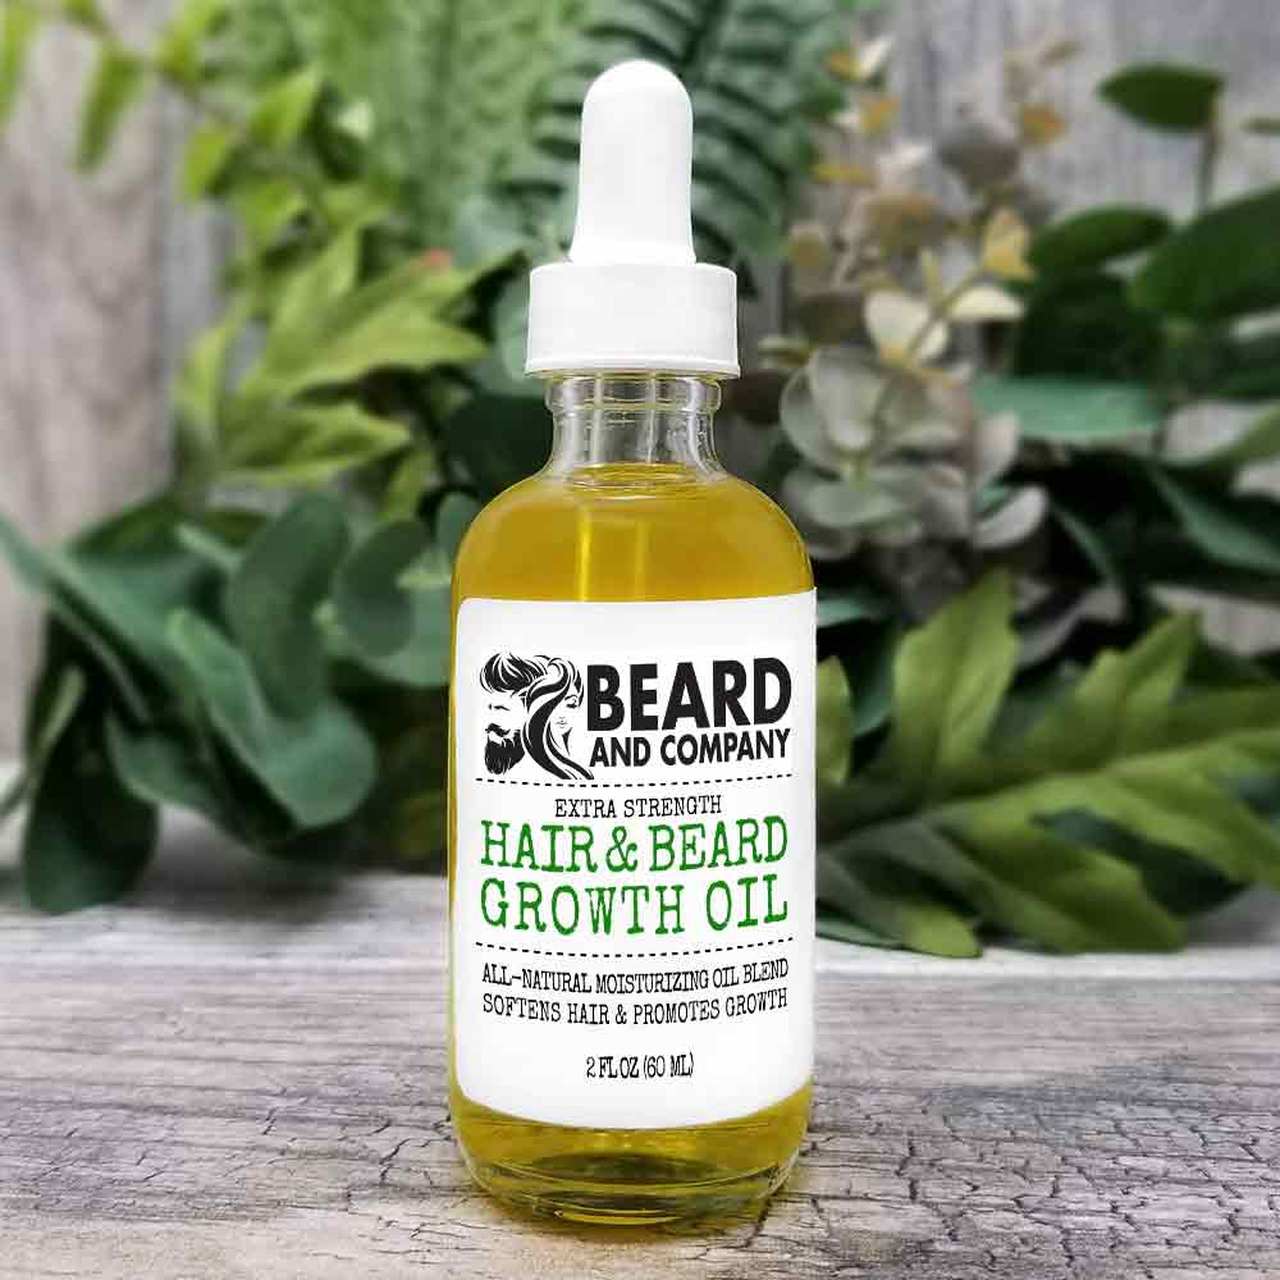 The 9 Best Beard Growth Products that Grow Your Beard Faster - Beard and  Company